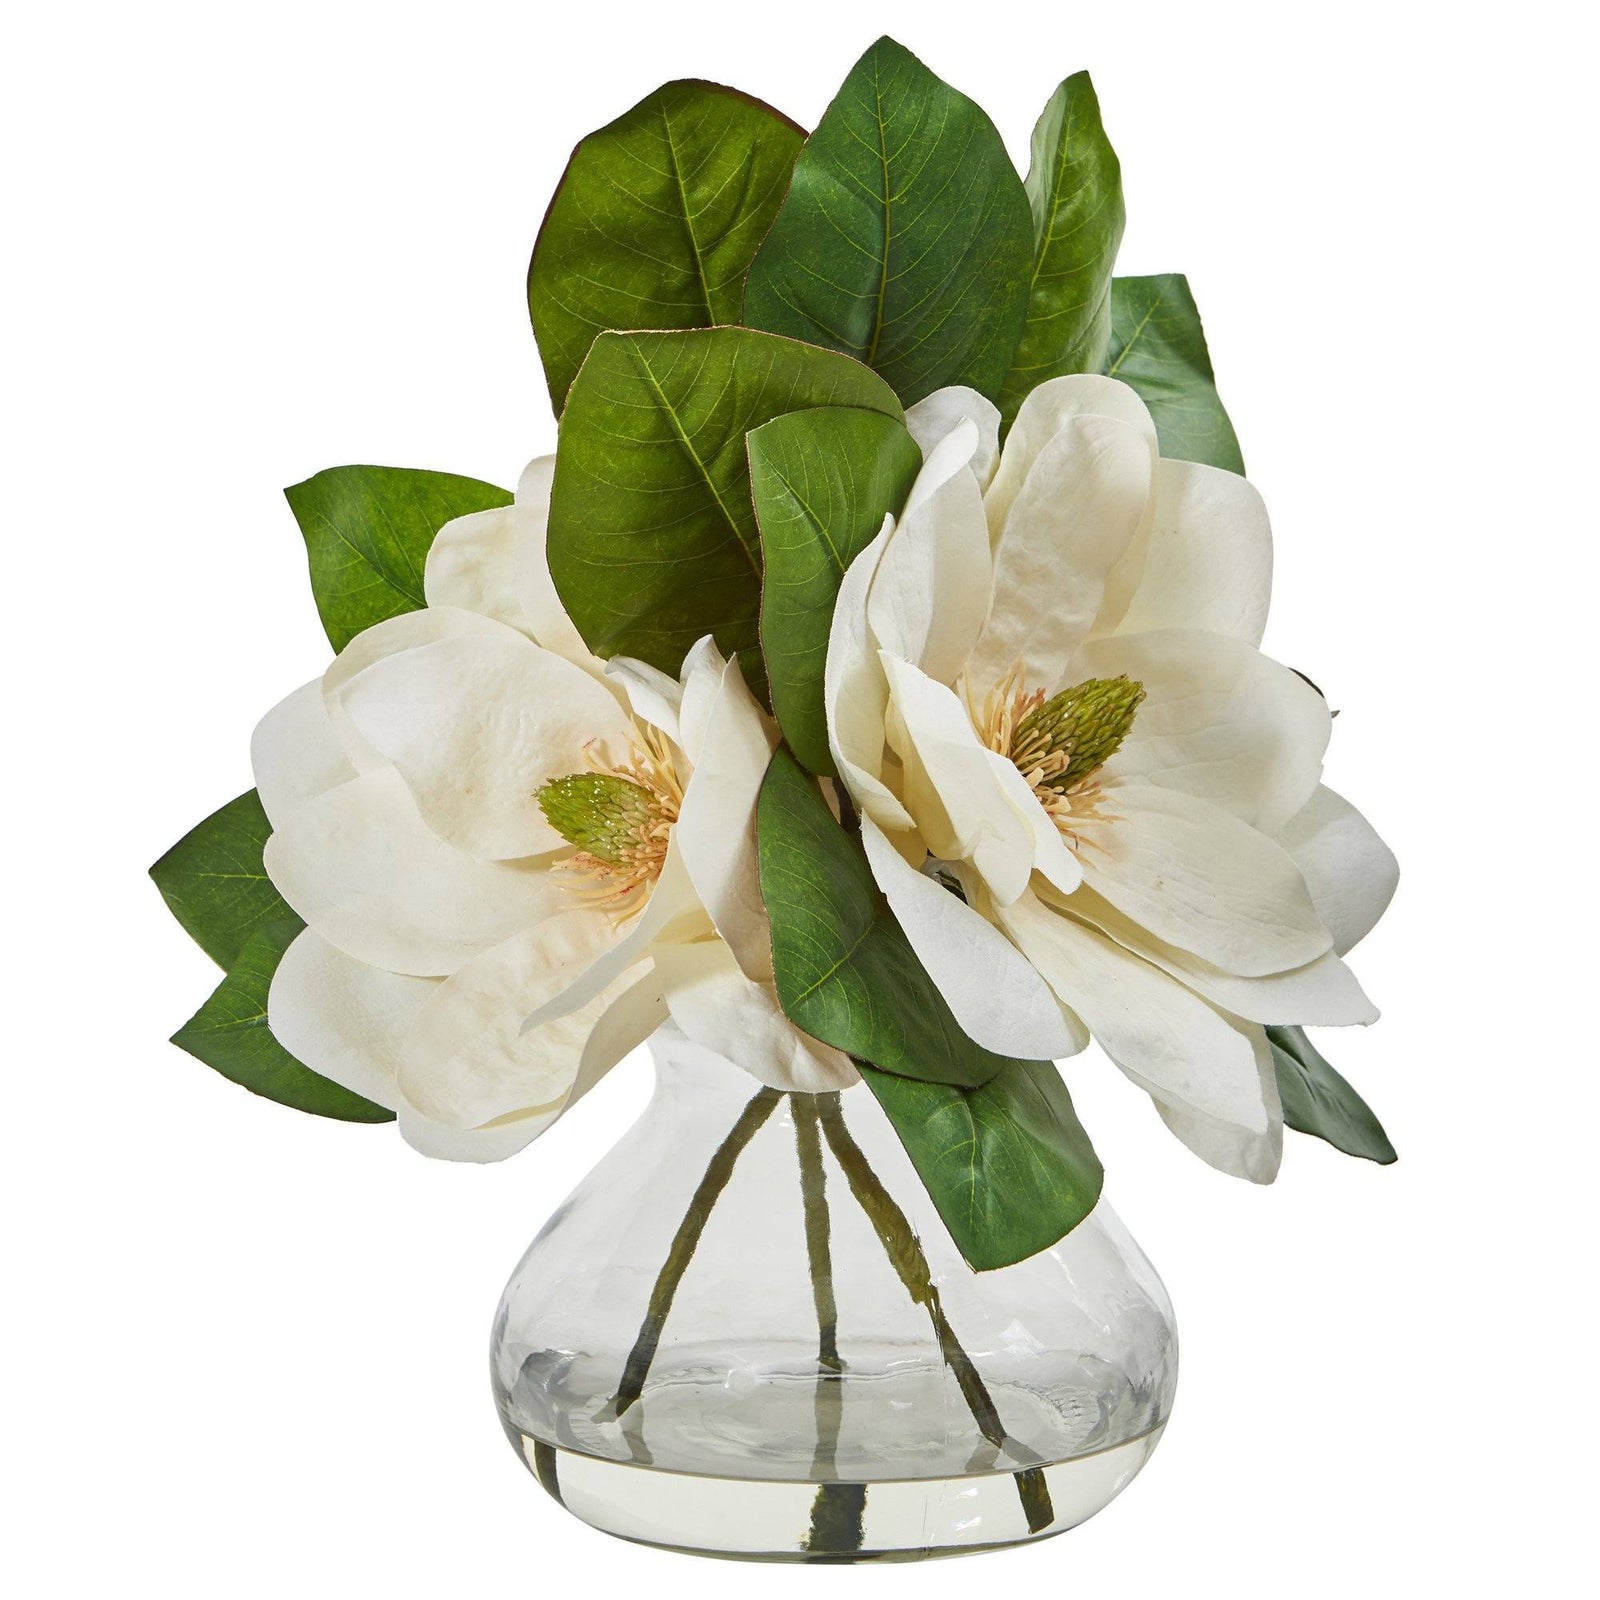 Magnolia Artificial Arrangement in Glass Vase | Nearly Natural